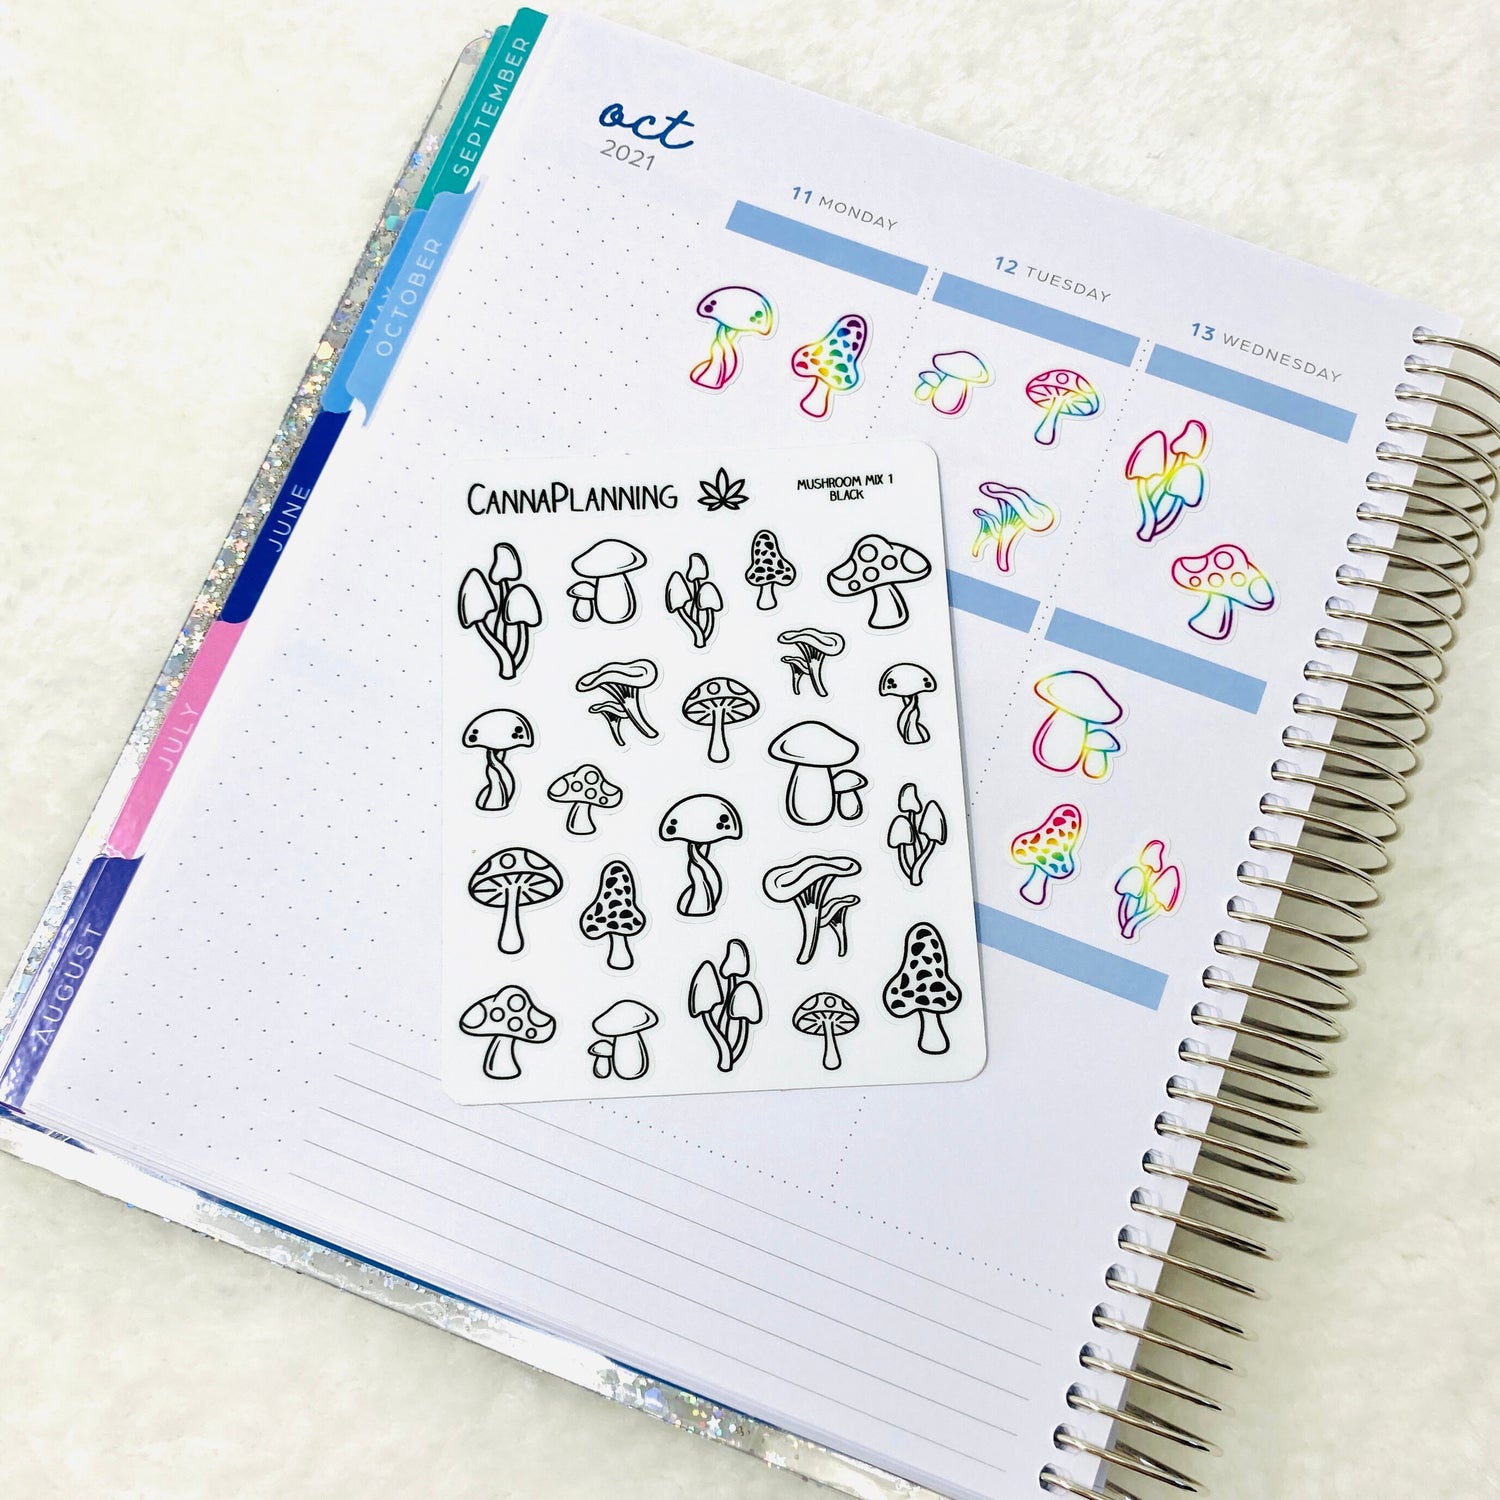 Mini Fountain Pen Icons - Planner stickers – Cosmicaa